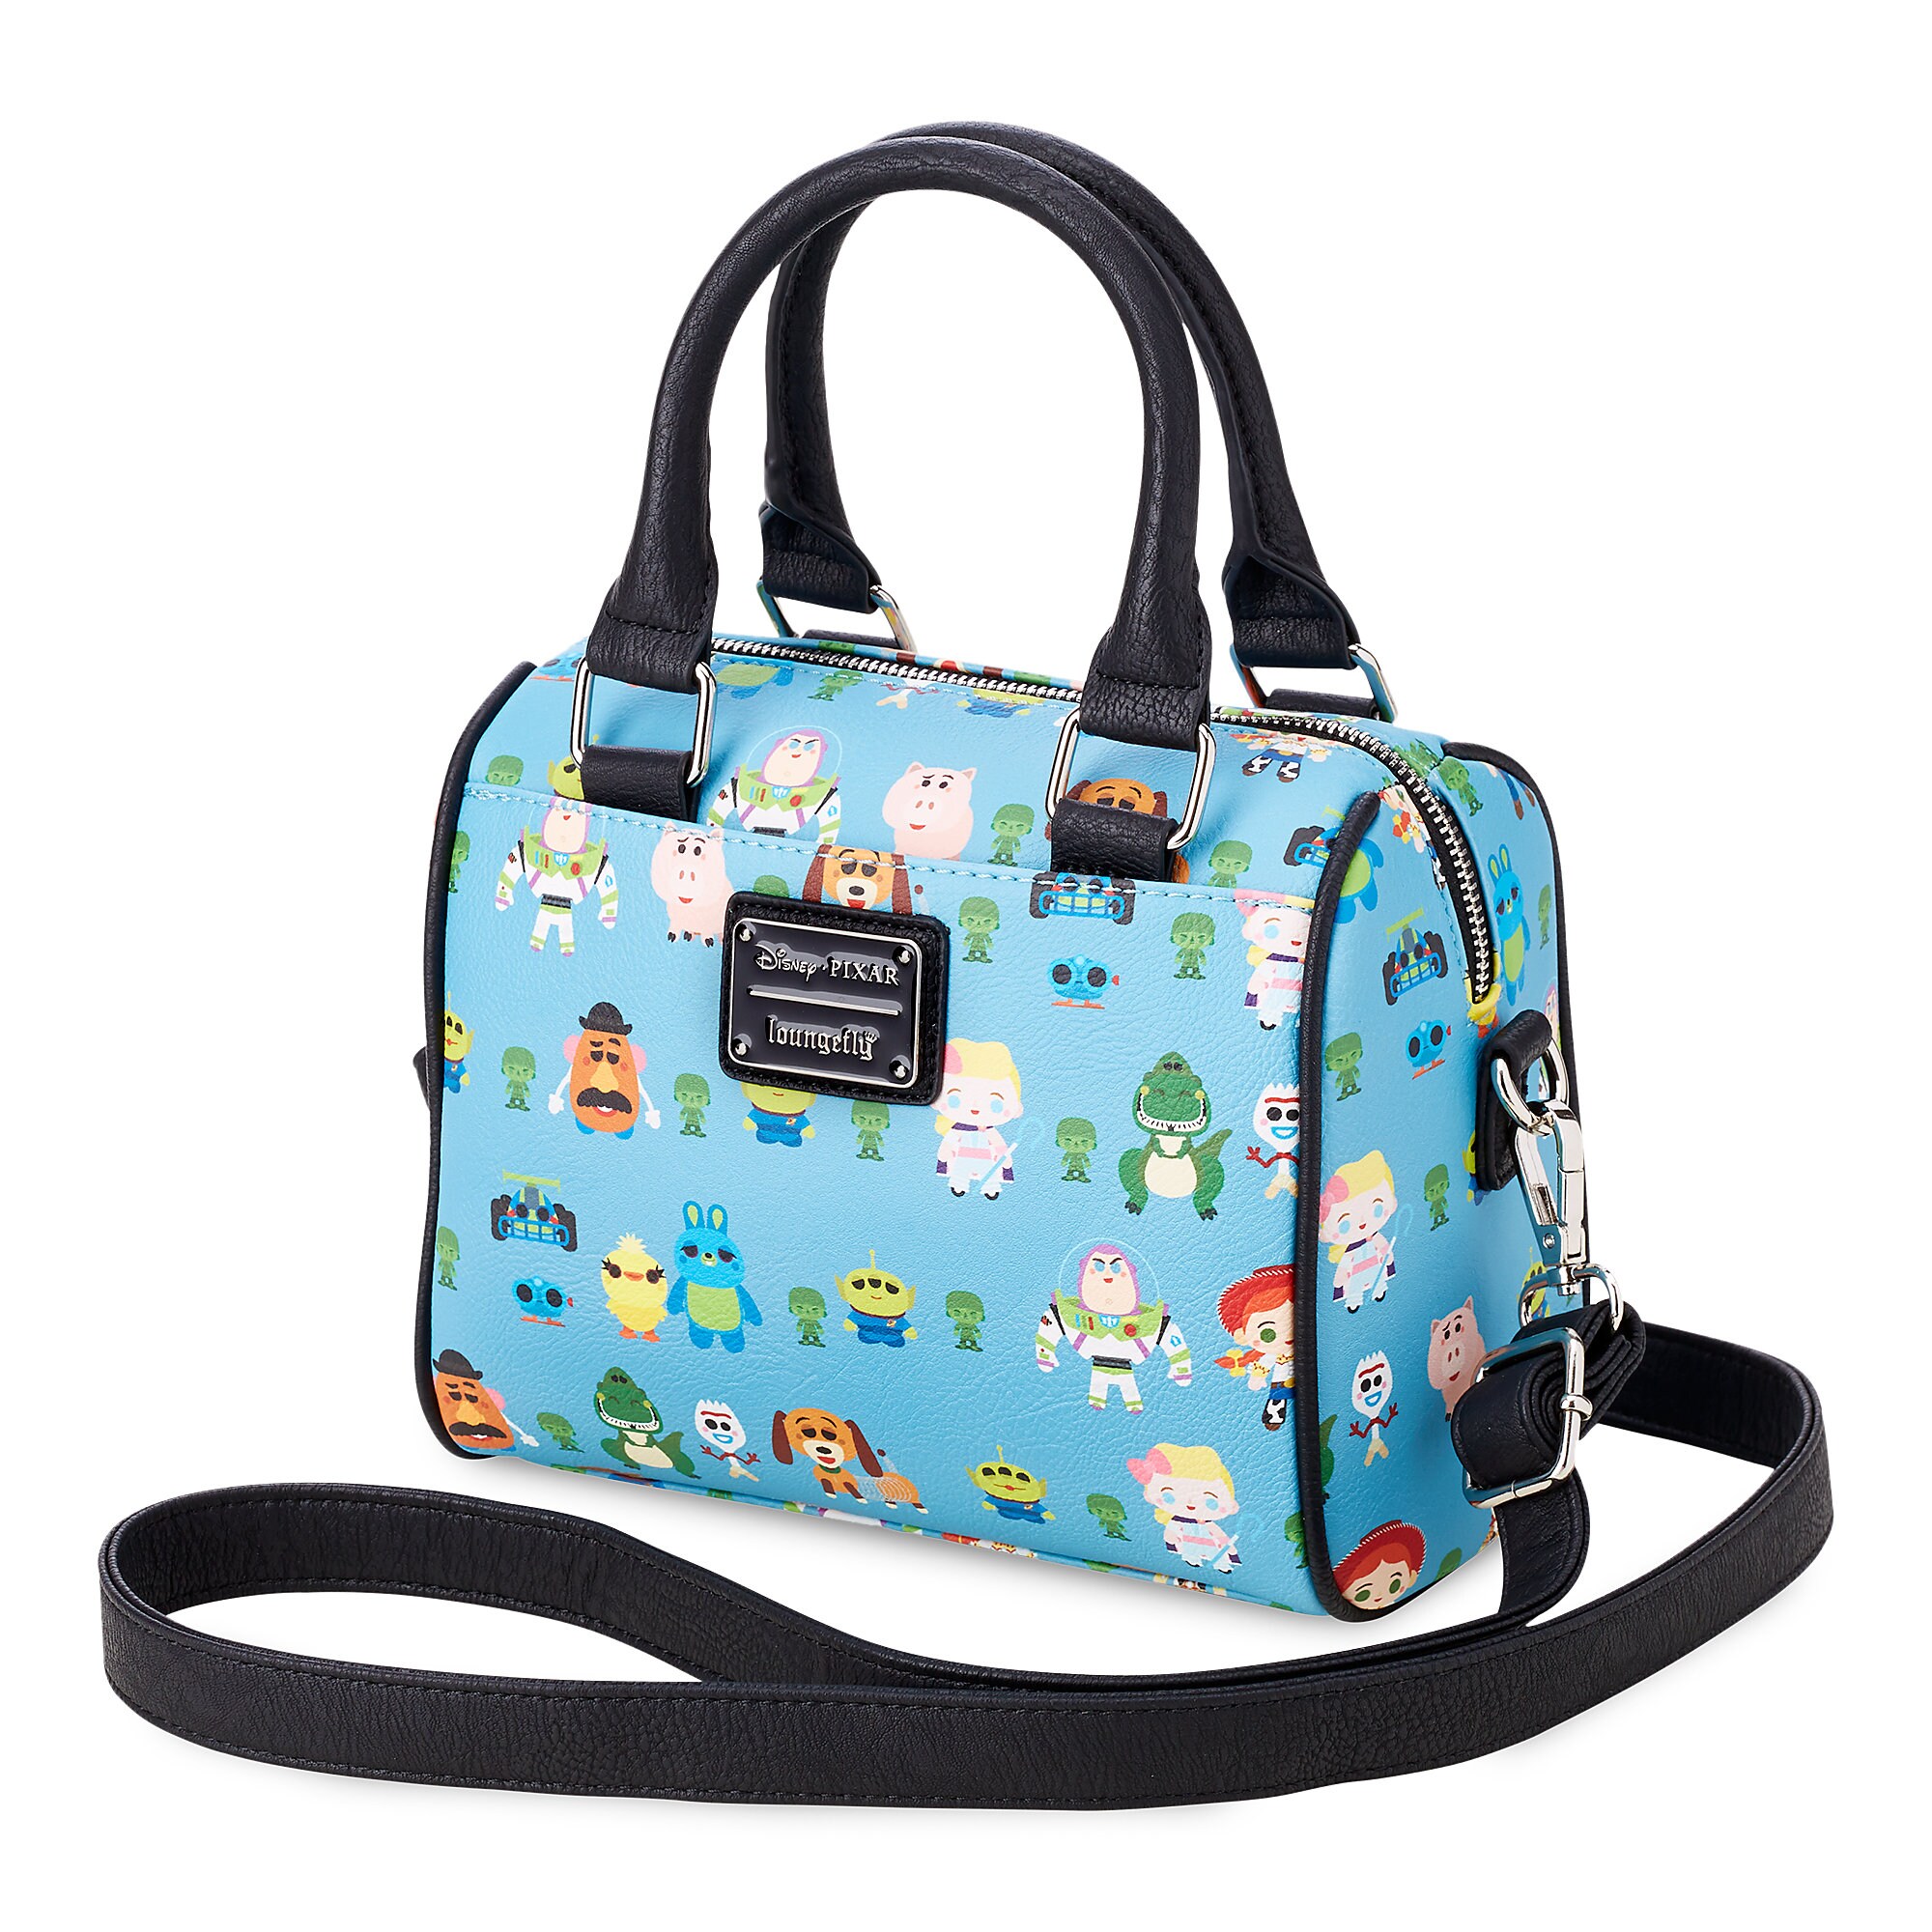 Toy Story 4 Duffel Bag by Loungefly